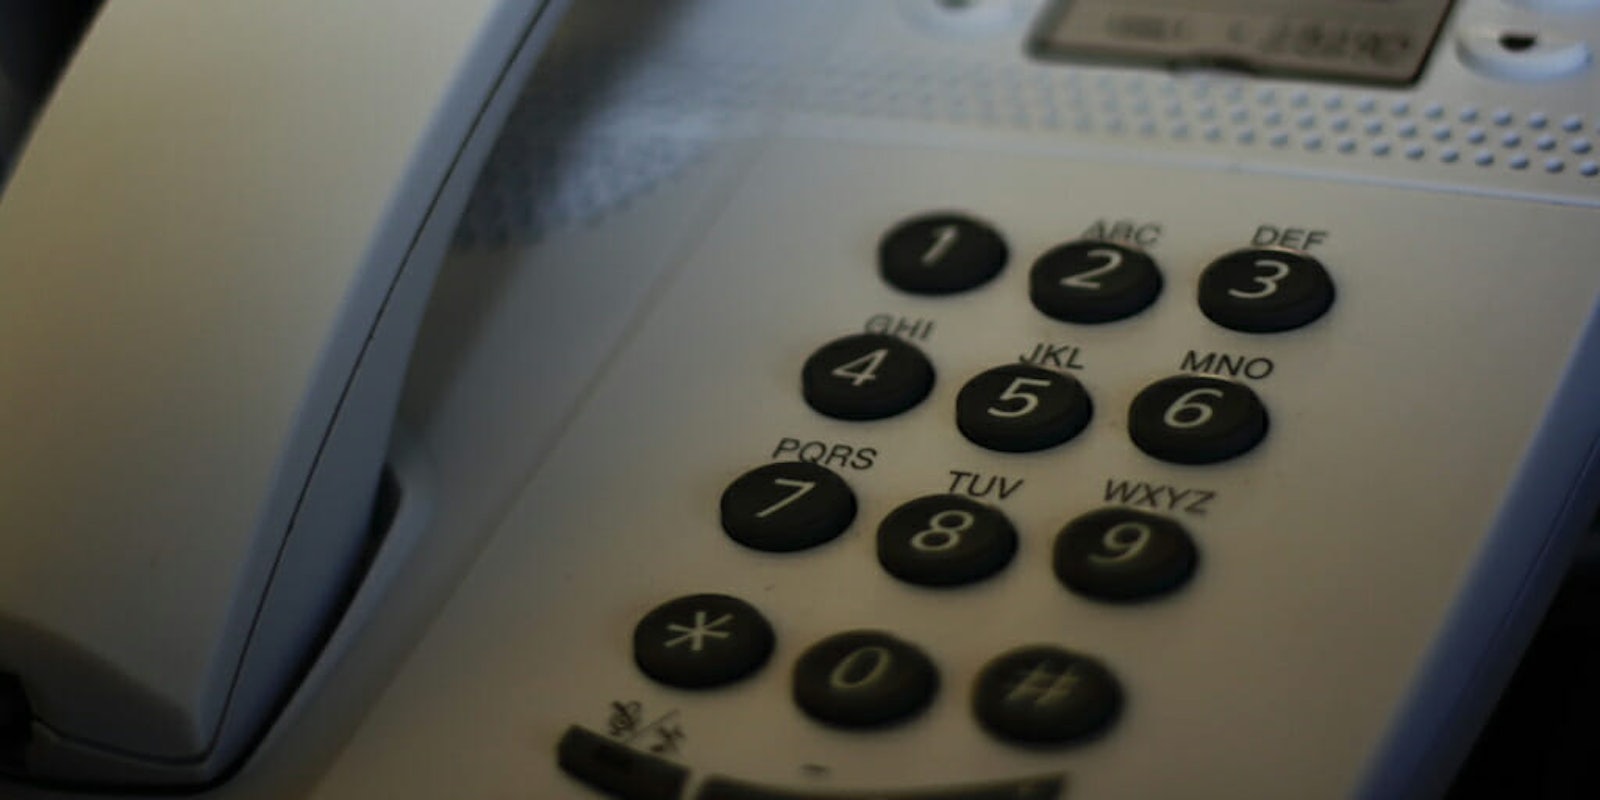 Prank calls flooded an ICE hotline in its initial days of operation.